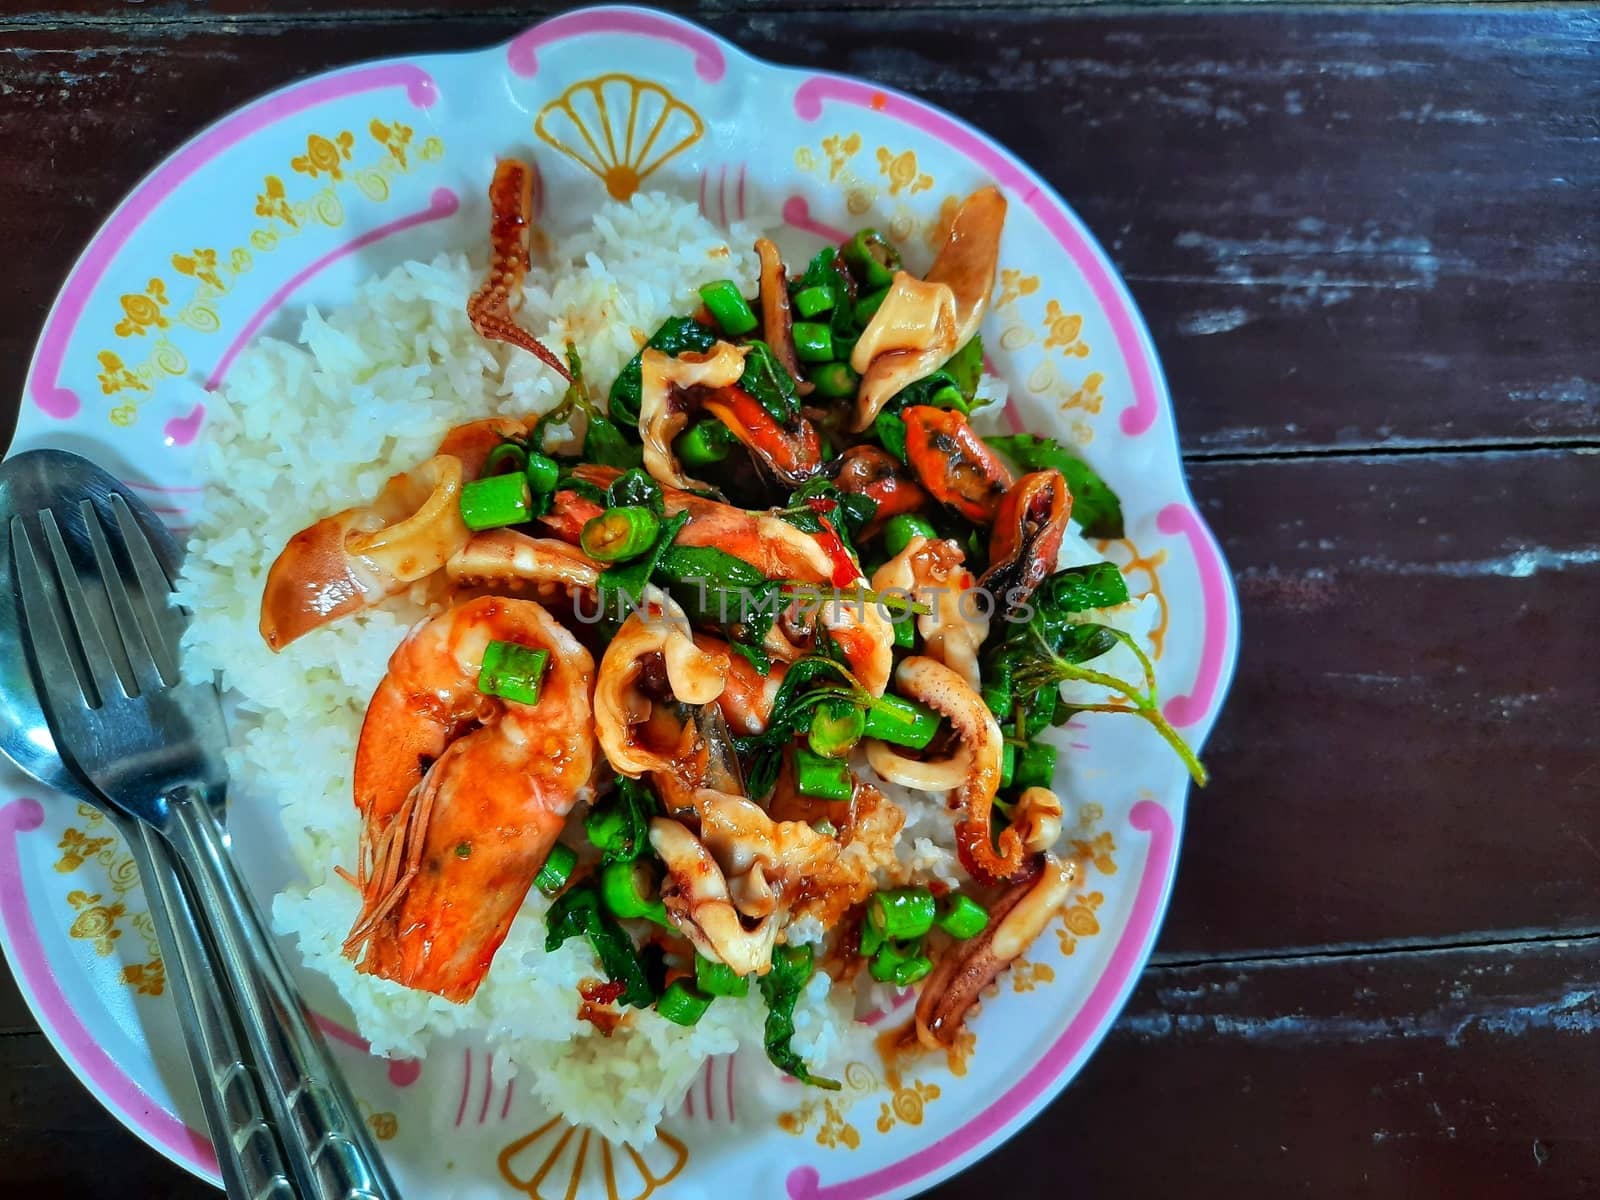 The Rice topped with stir-fried seafood and basil